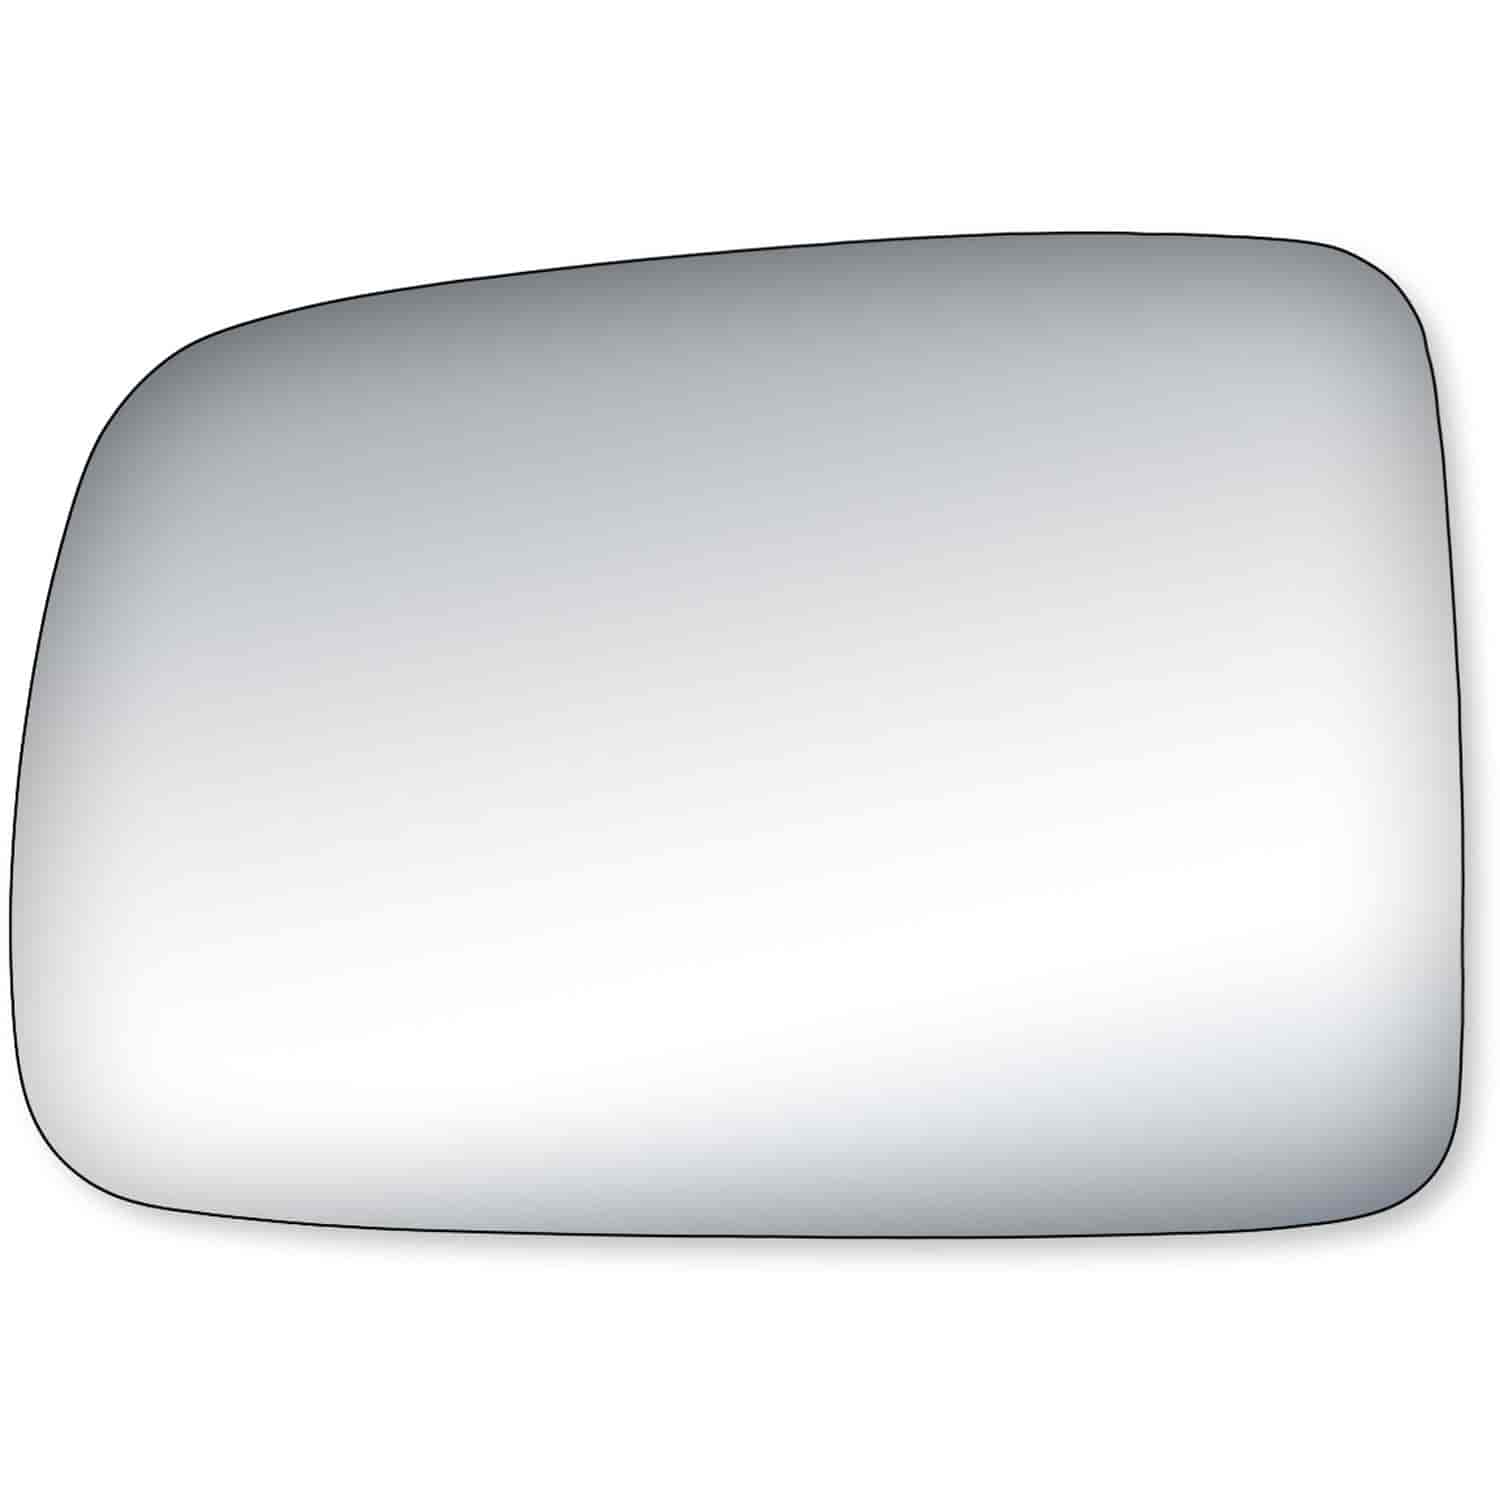 Replacement Glass for 97-01 CR-V LX the glass measures 4 9/16 tall by 6 7/8 wide and 7 5/8 diagonall